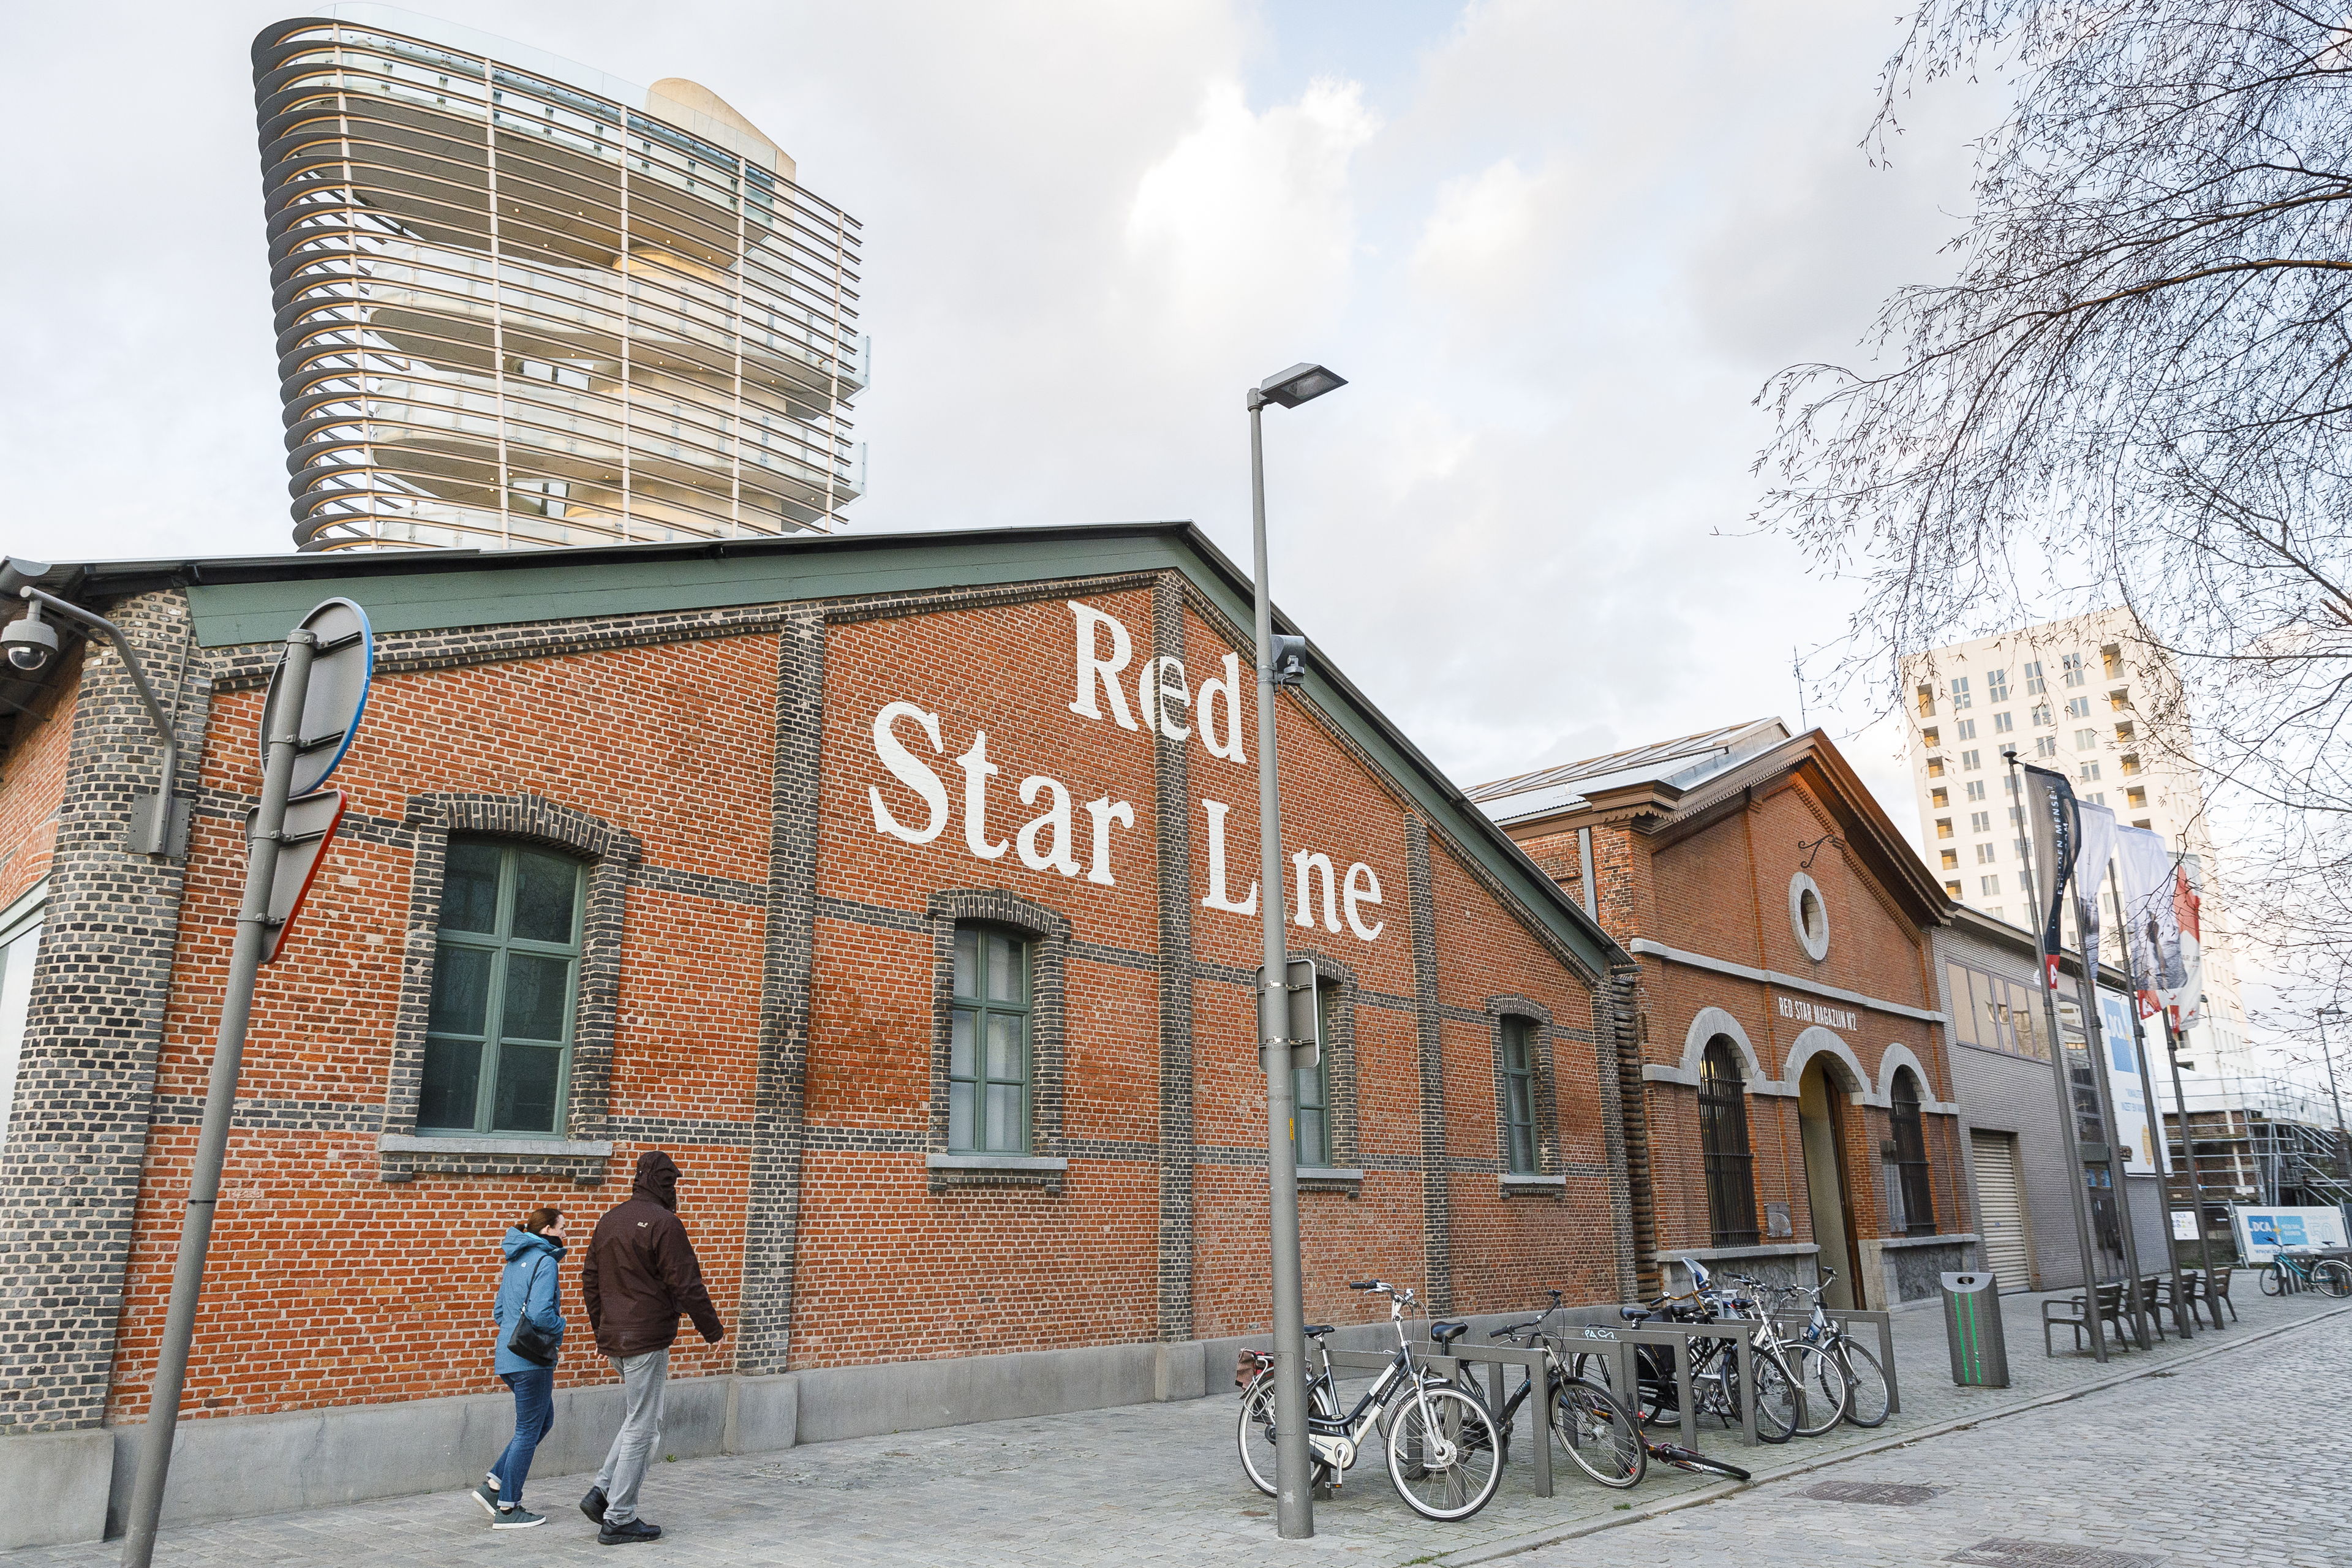 Red Star Line Museum - General Images